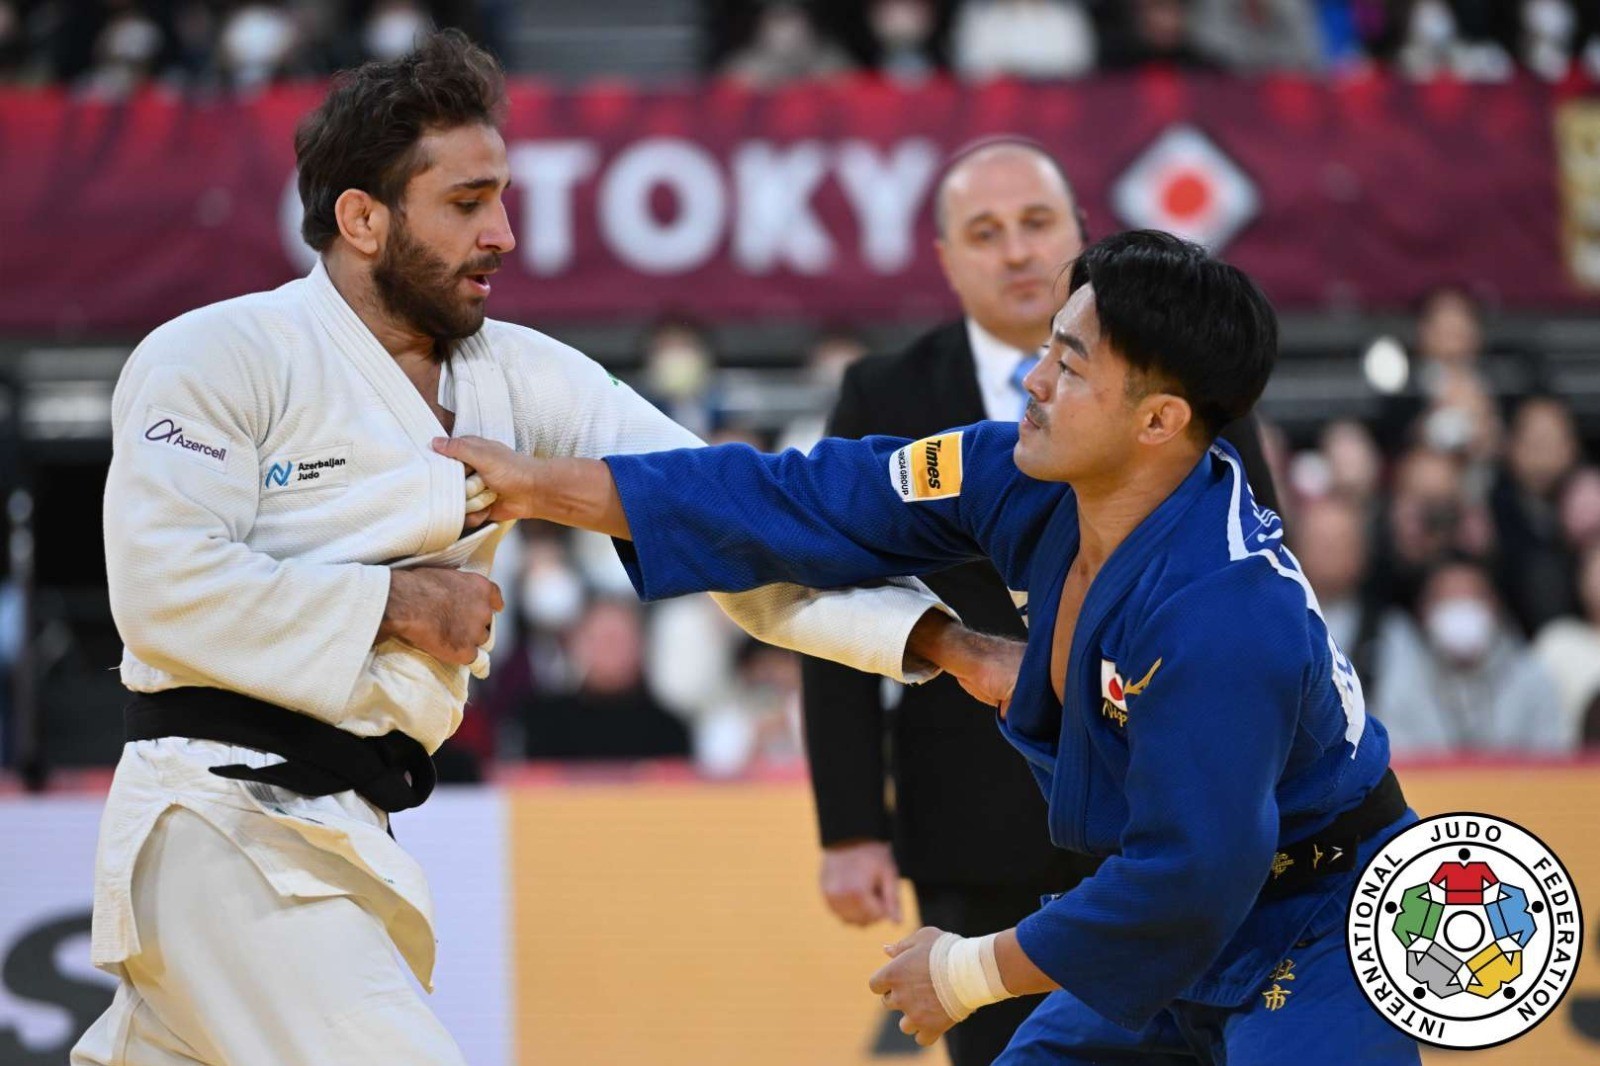 Hidayat Heydarov: "My goal was to defeat the Japanese in Japan, I achieved my dream"